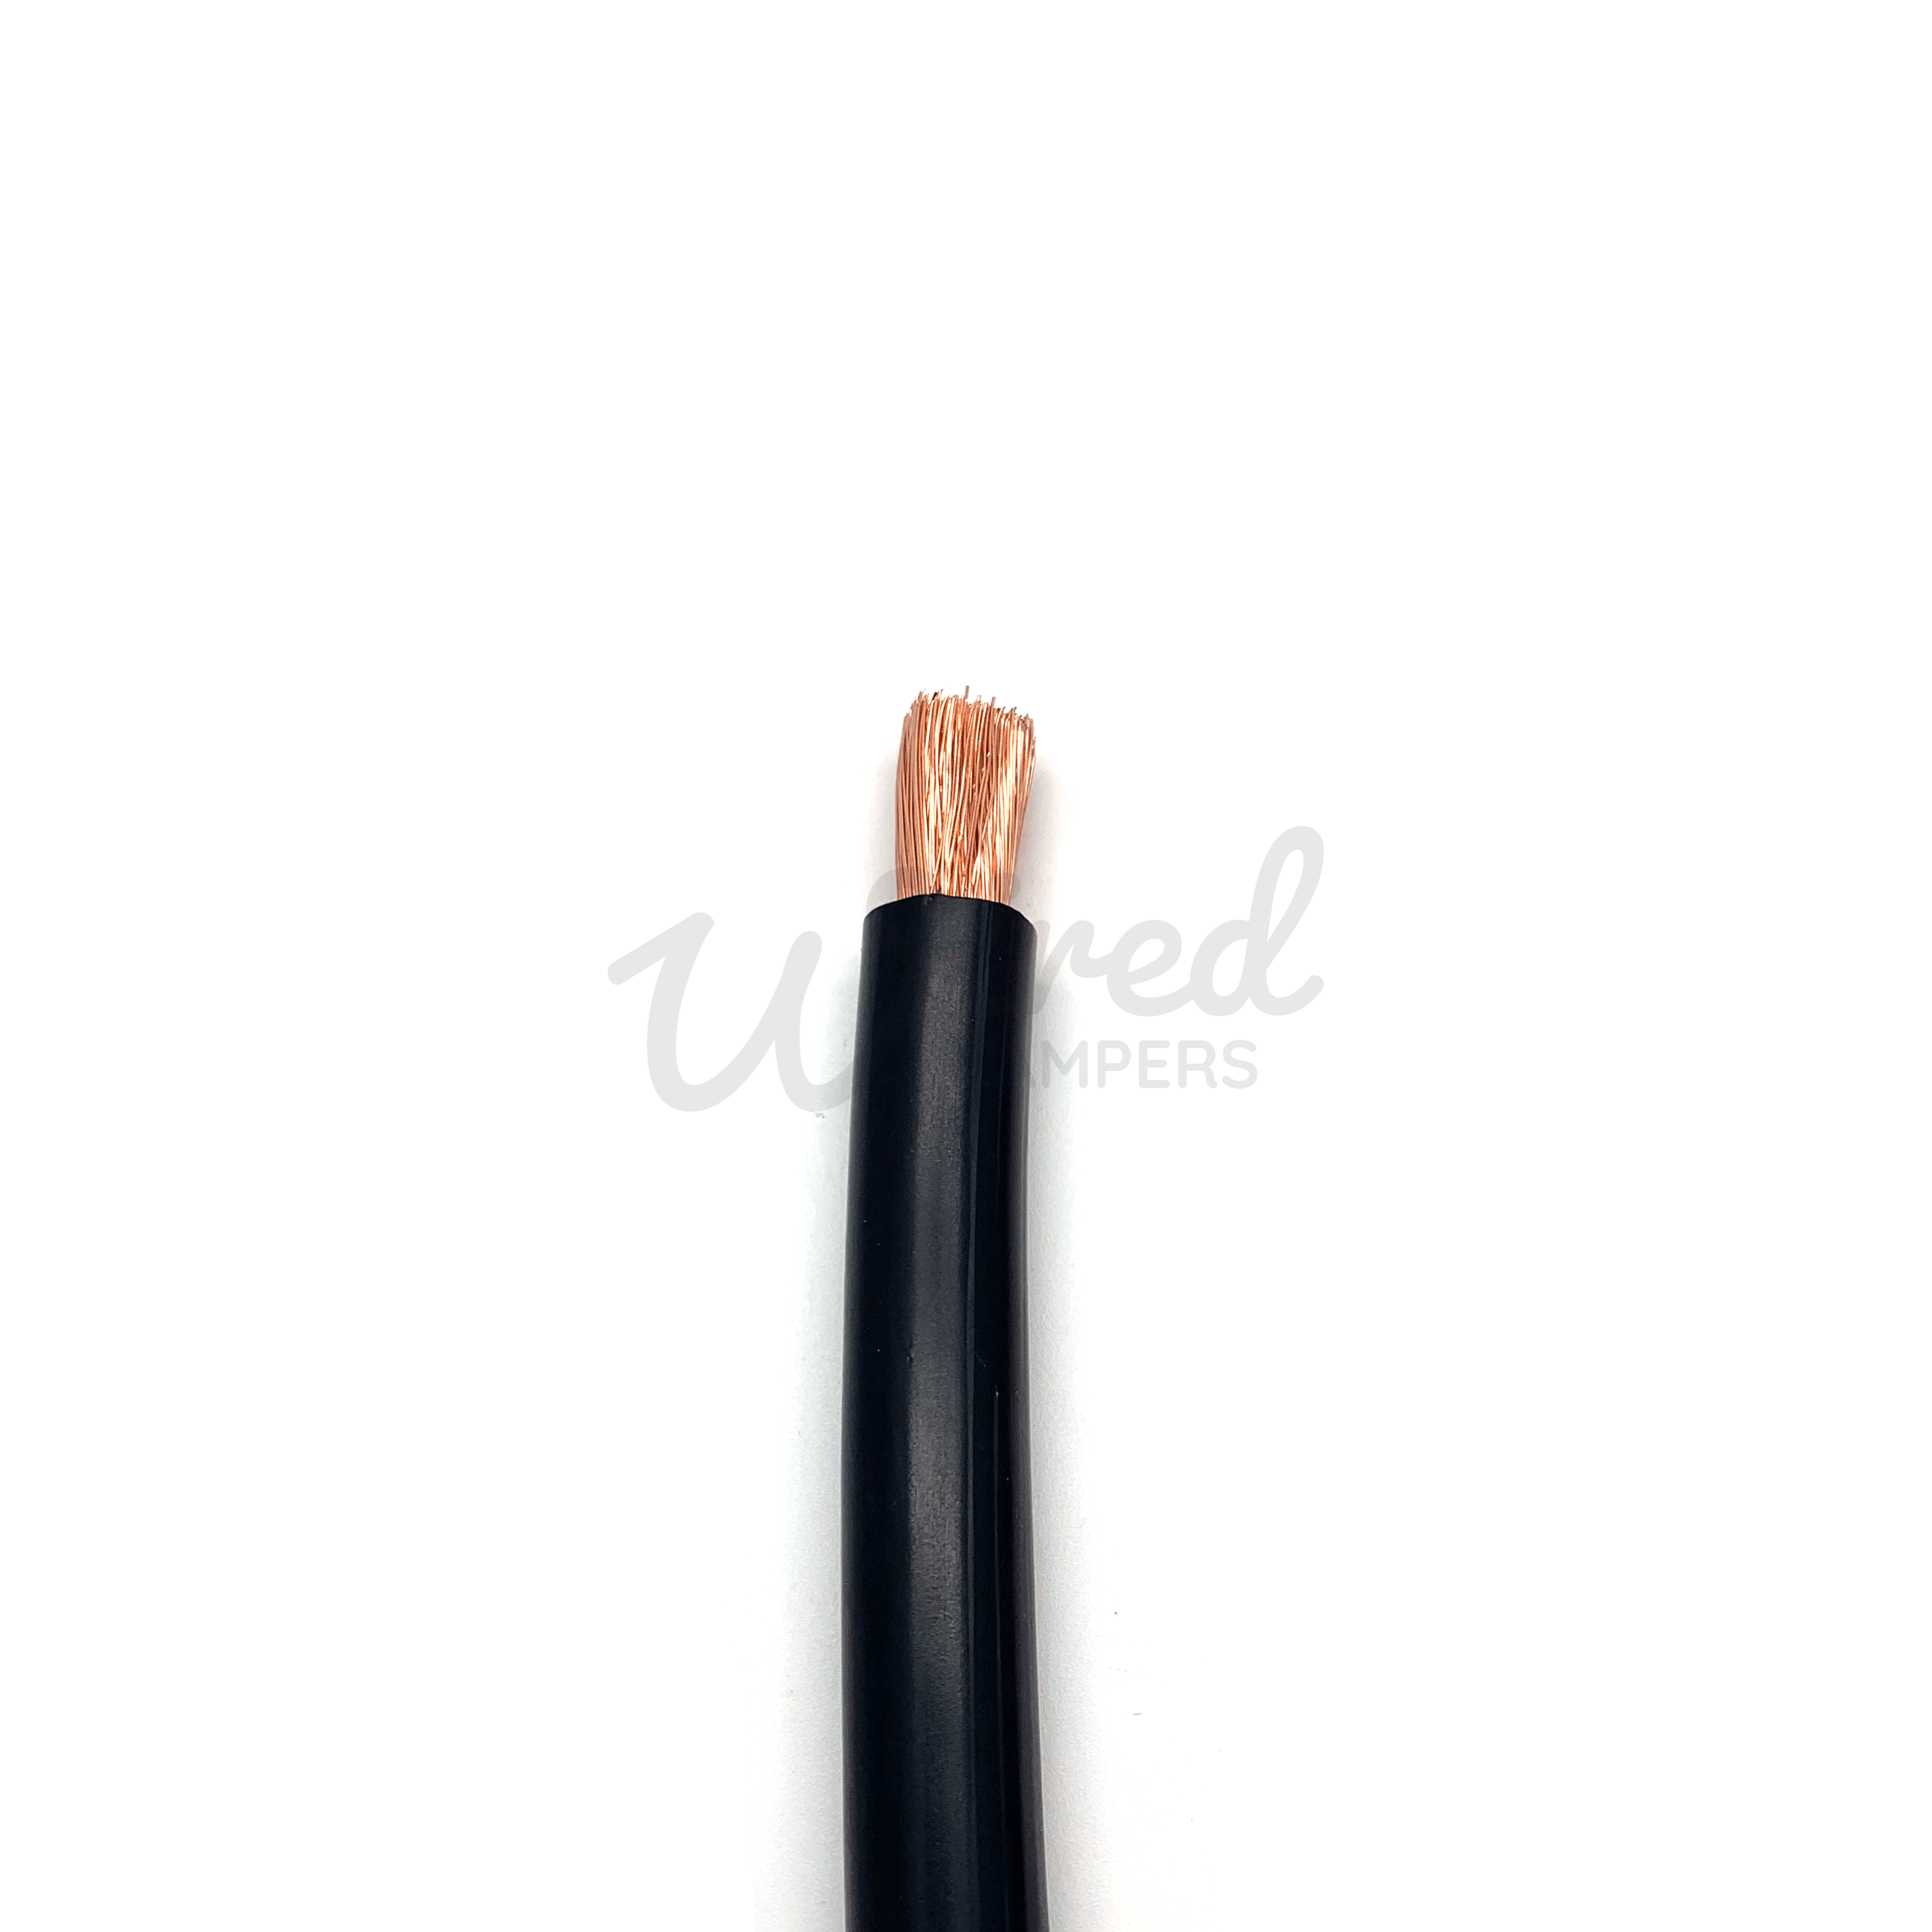 Wired Campers Limited 100M - 16mm2 110A Hi-Flex Battery/Welding/Inverter Flexible Cable - Black Negative